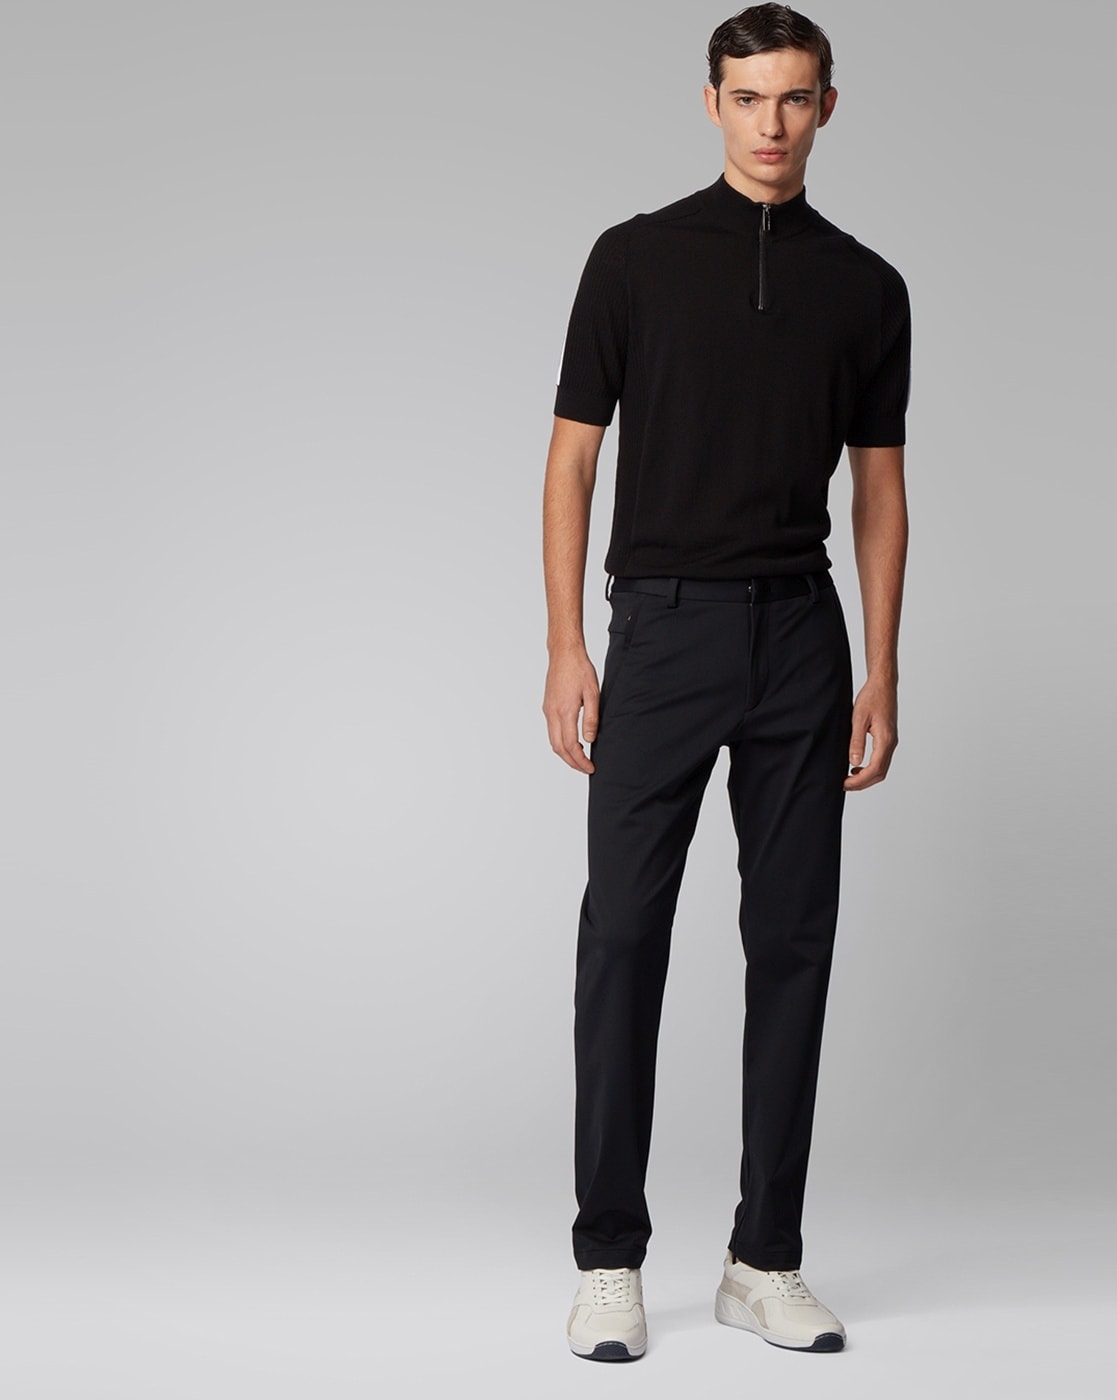 Black Poloshirt Loafers Fashion Trends With Grey Casual Trouser Black  Polo Grey Pants  Polo shirt ralph lauren corporation